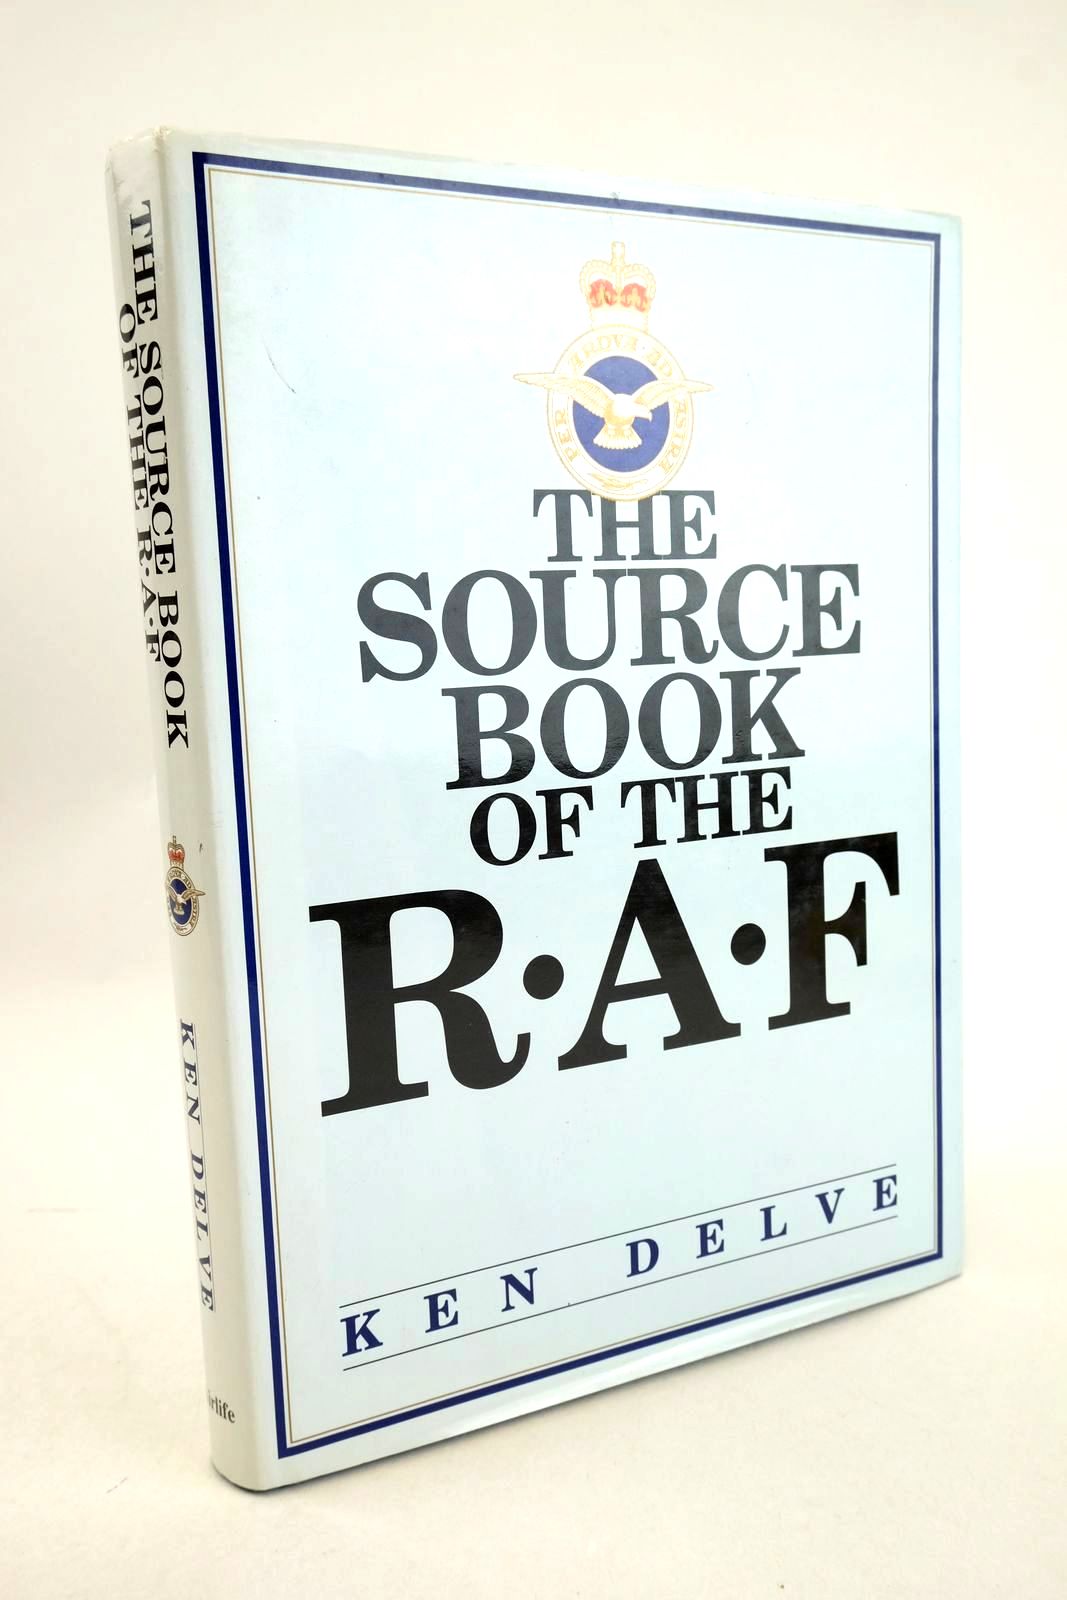 Photo of THE SOURCE BOOK OF THE R.A.F. written by Delve, Ken published by Airlife (STOCK CODE: 1327222)  for sale by Stella & Rose's Books